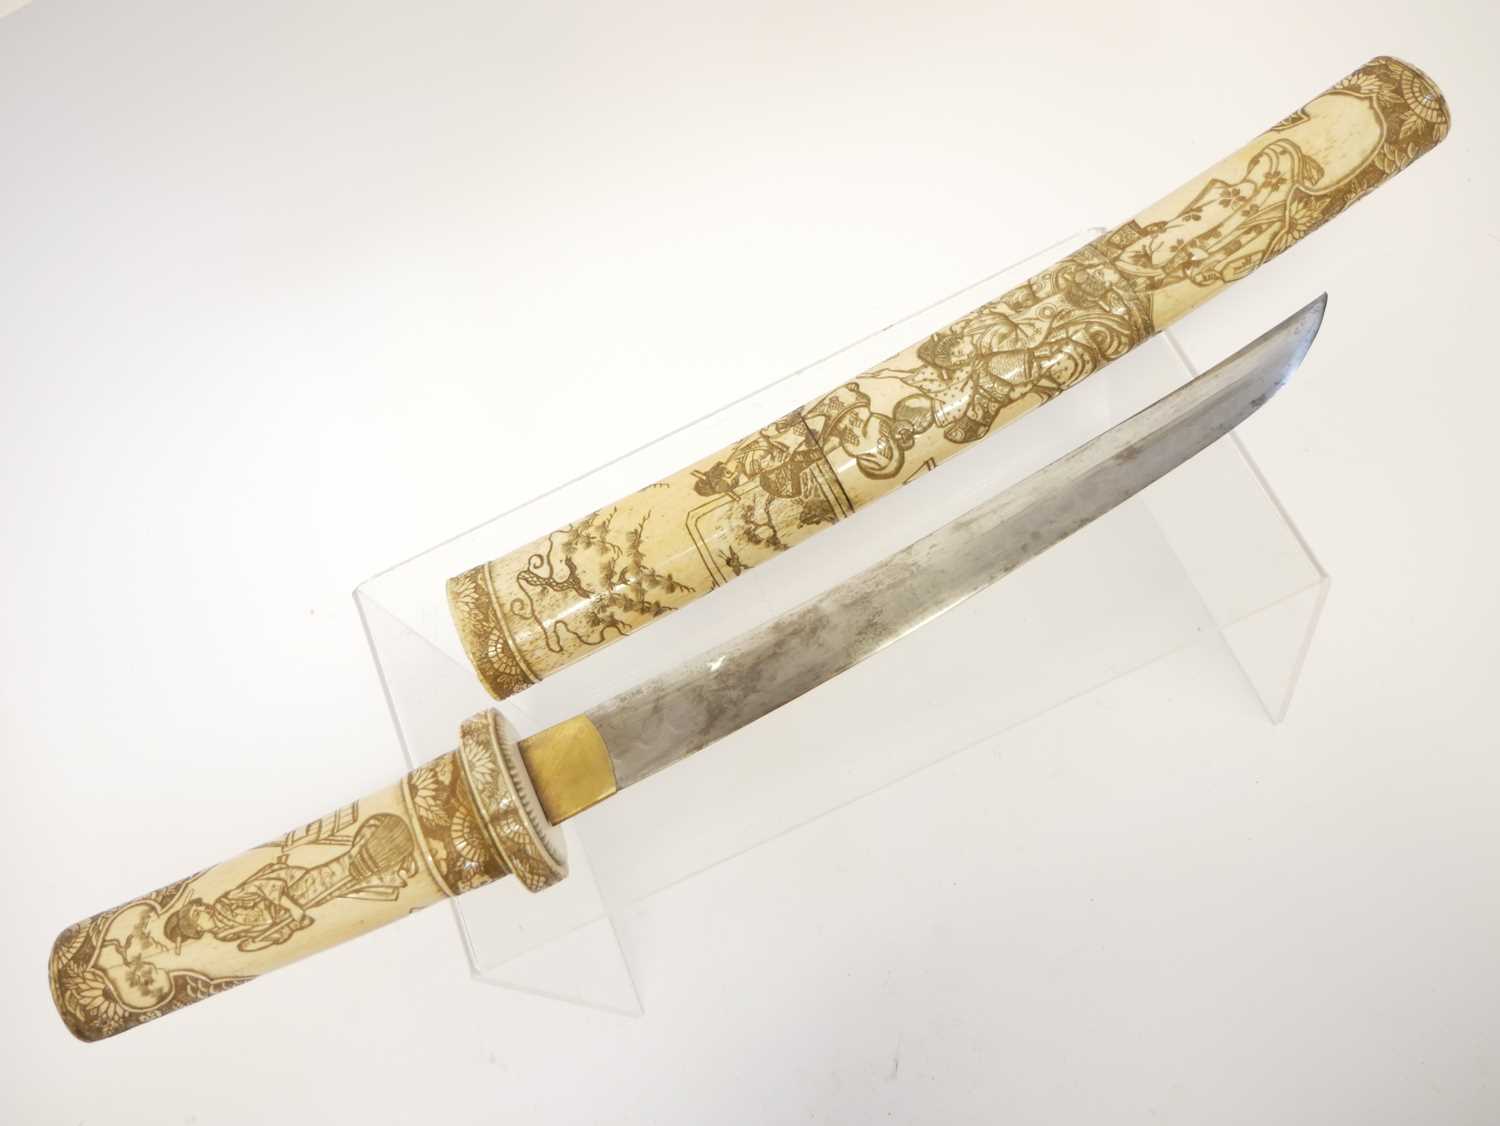 Japanese bone mounted tanto dagger, slightly curved 11inch cutting edge blade, the mounts carved and - Image 2 of 14